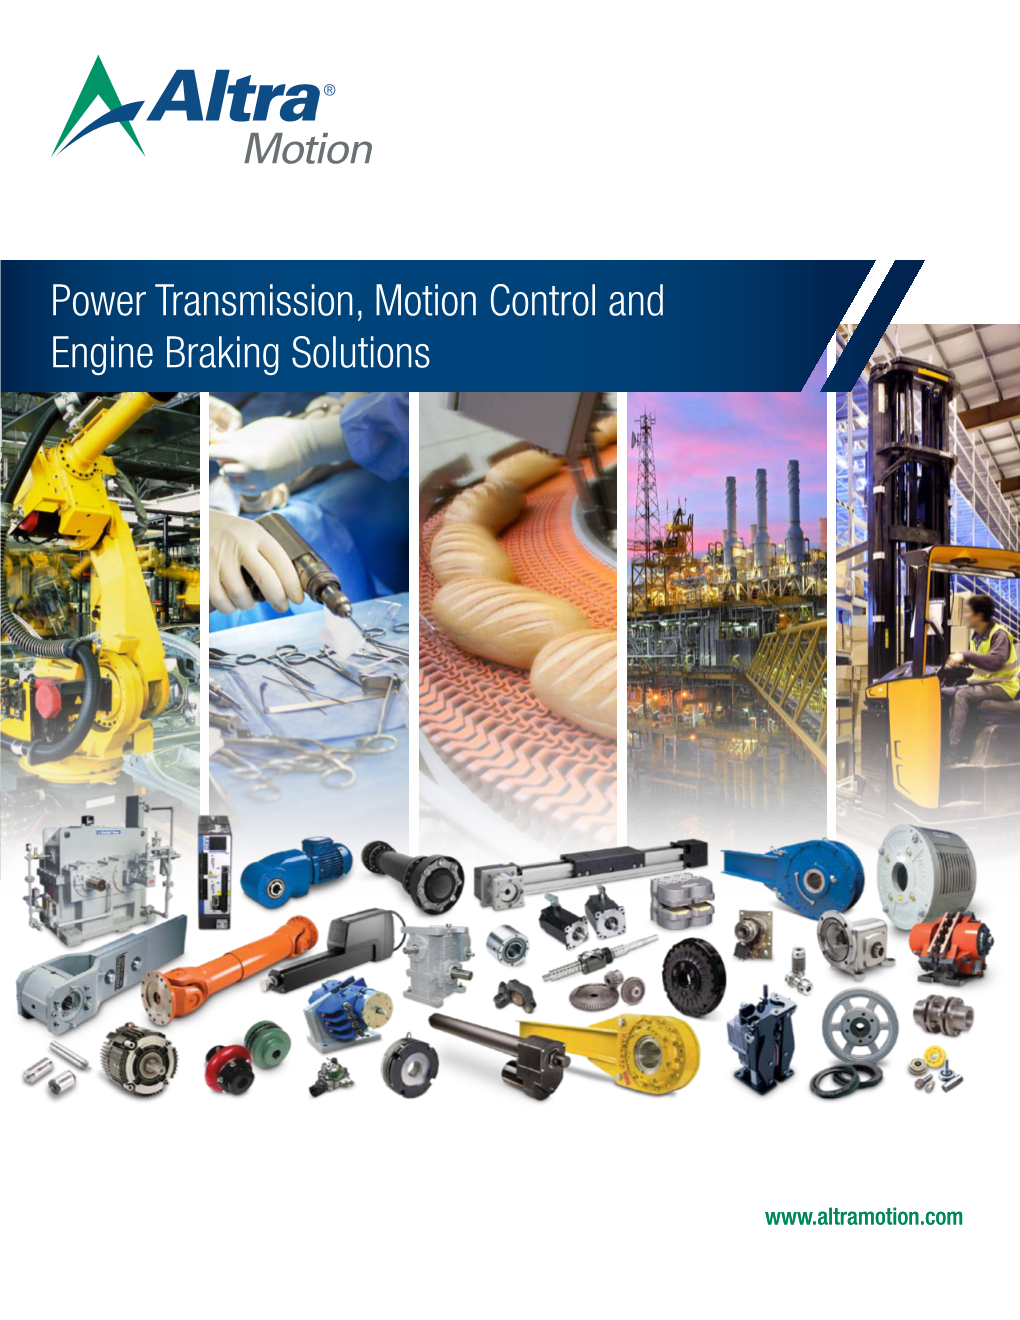 Power Transmission, Motion Control and Engine Braking Solutions